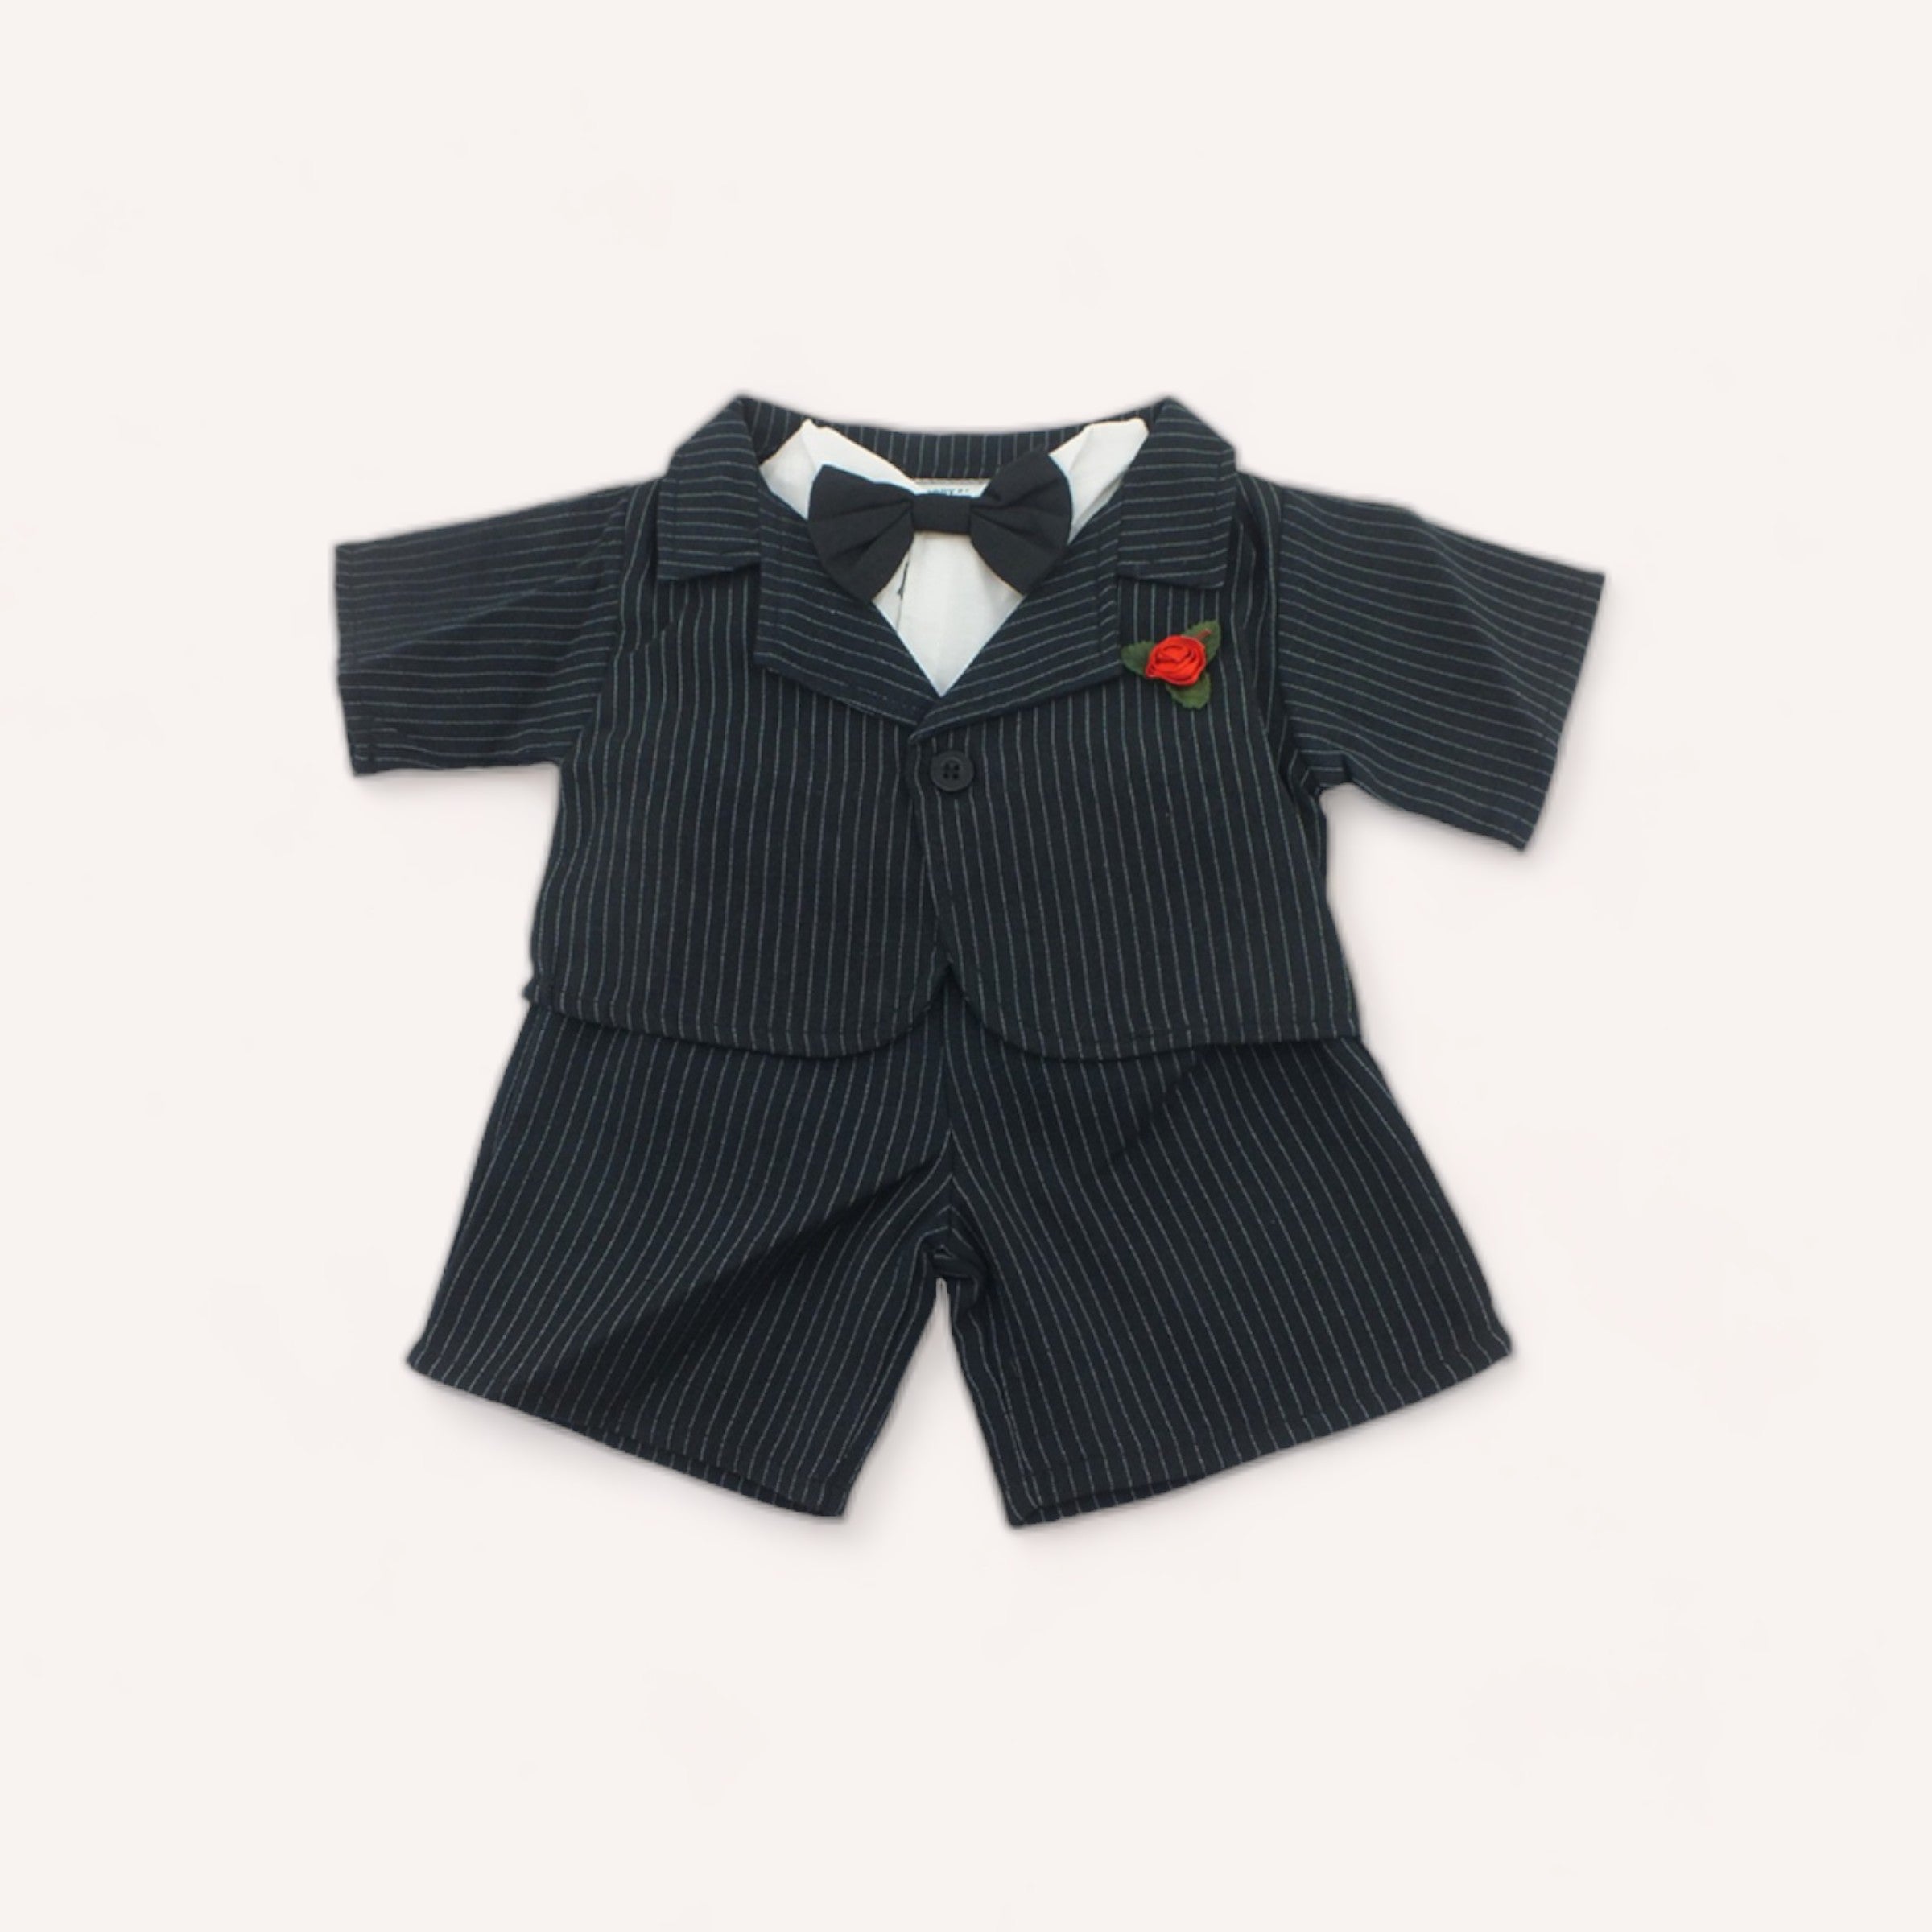 Formal pint-sized pinstripe Bear Wedding Groom Outfit with bow tie for toddlers, ready for a dapper occasion from The Teddy Factory.